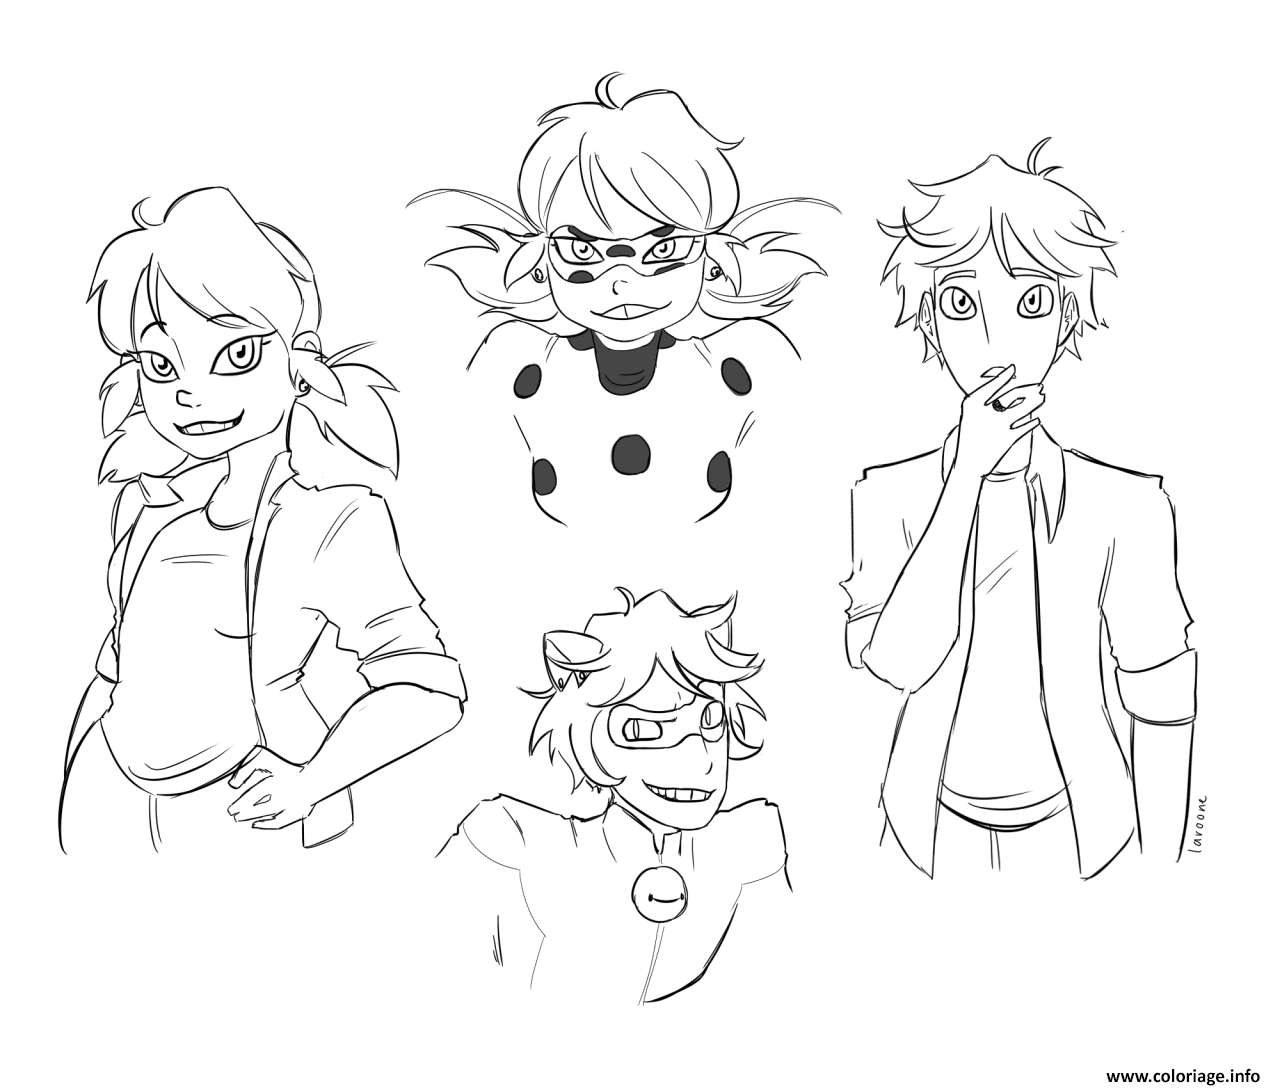 Coloriage Personnages Demiraculous Ladybug Chat Noir Dessin Ladybug destiné Chat Noir Coloriage